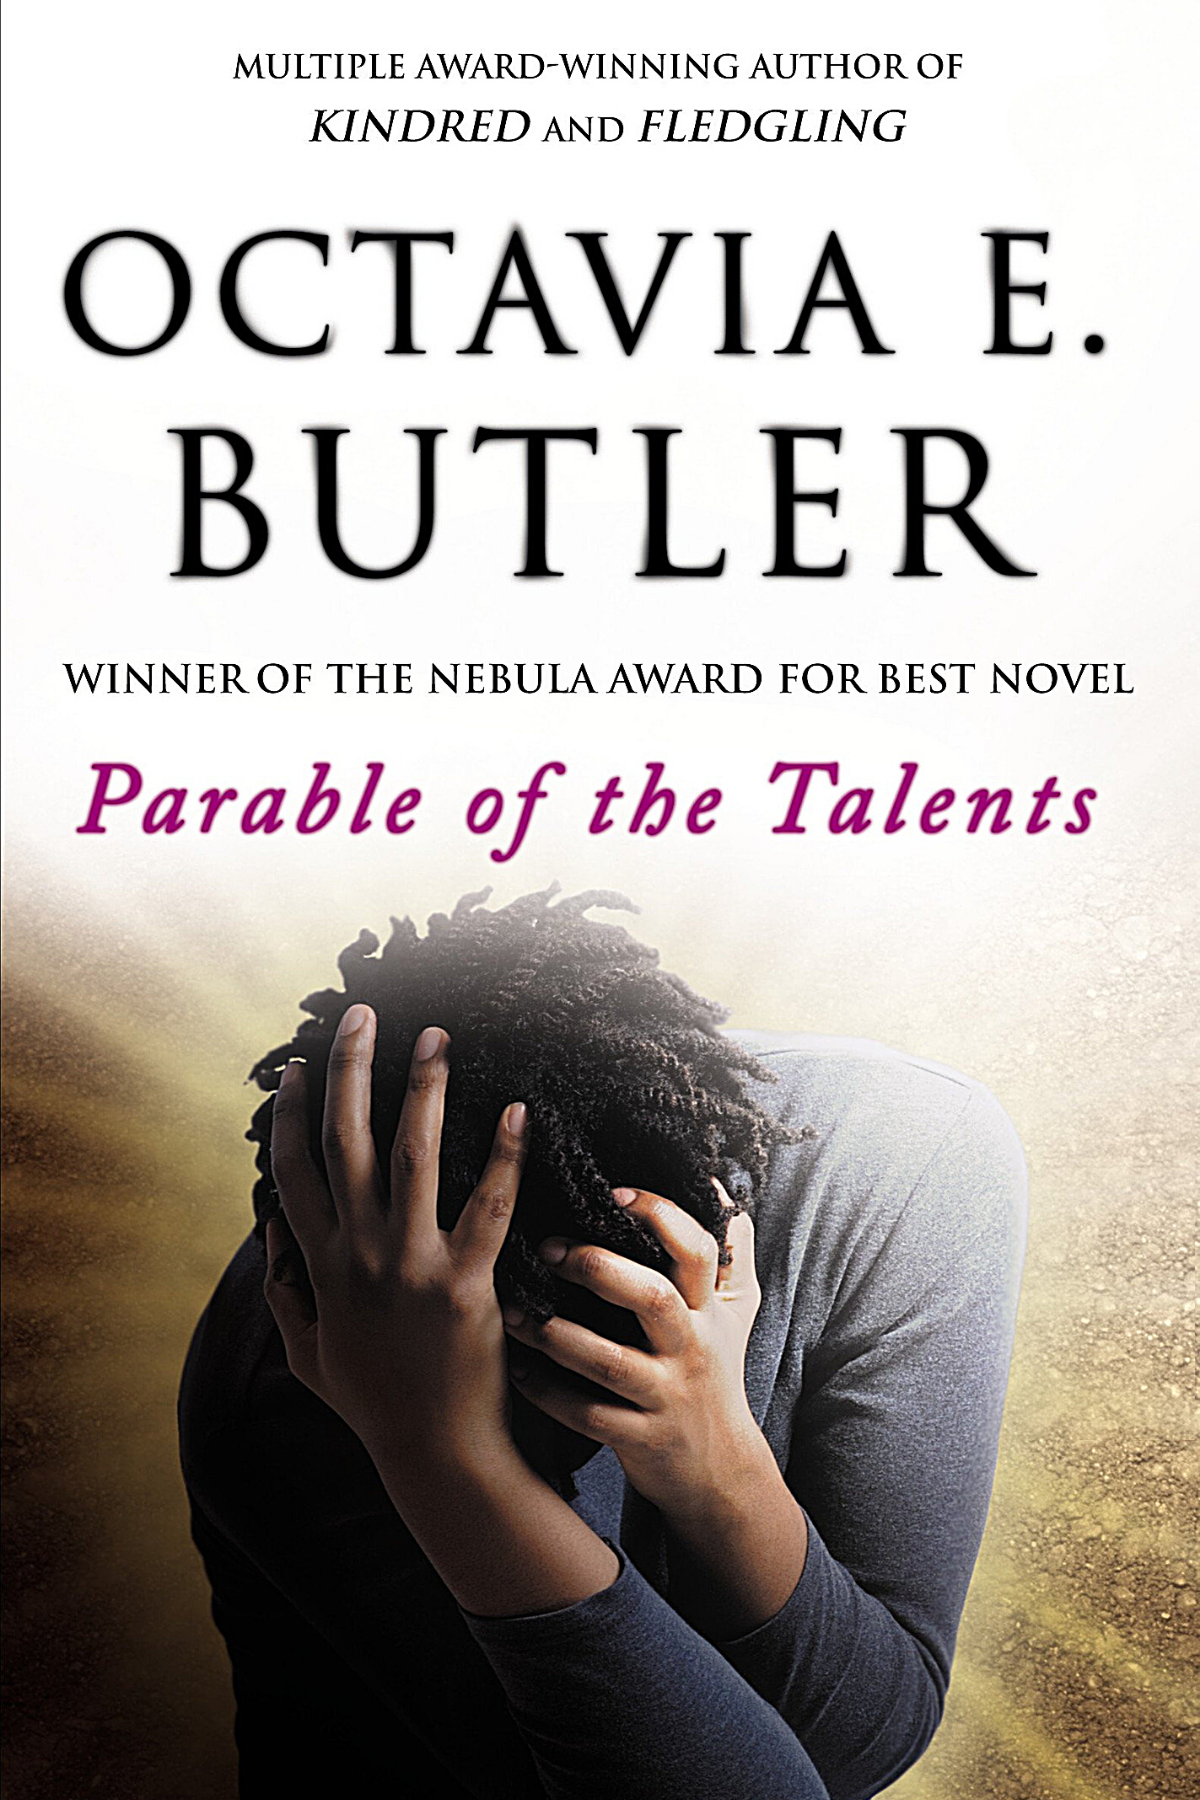 Parable of the Talents by Octavia E. Butler - Audiobook 